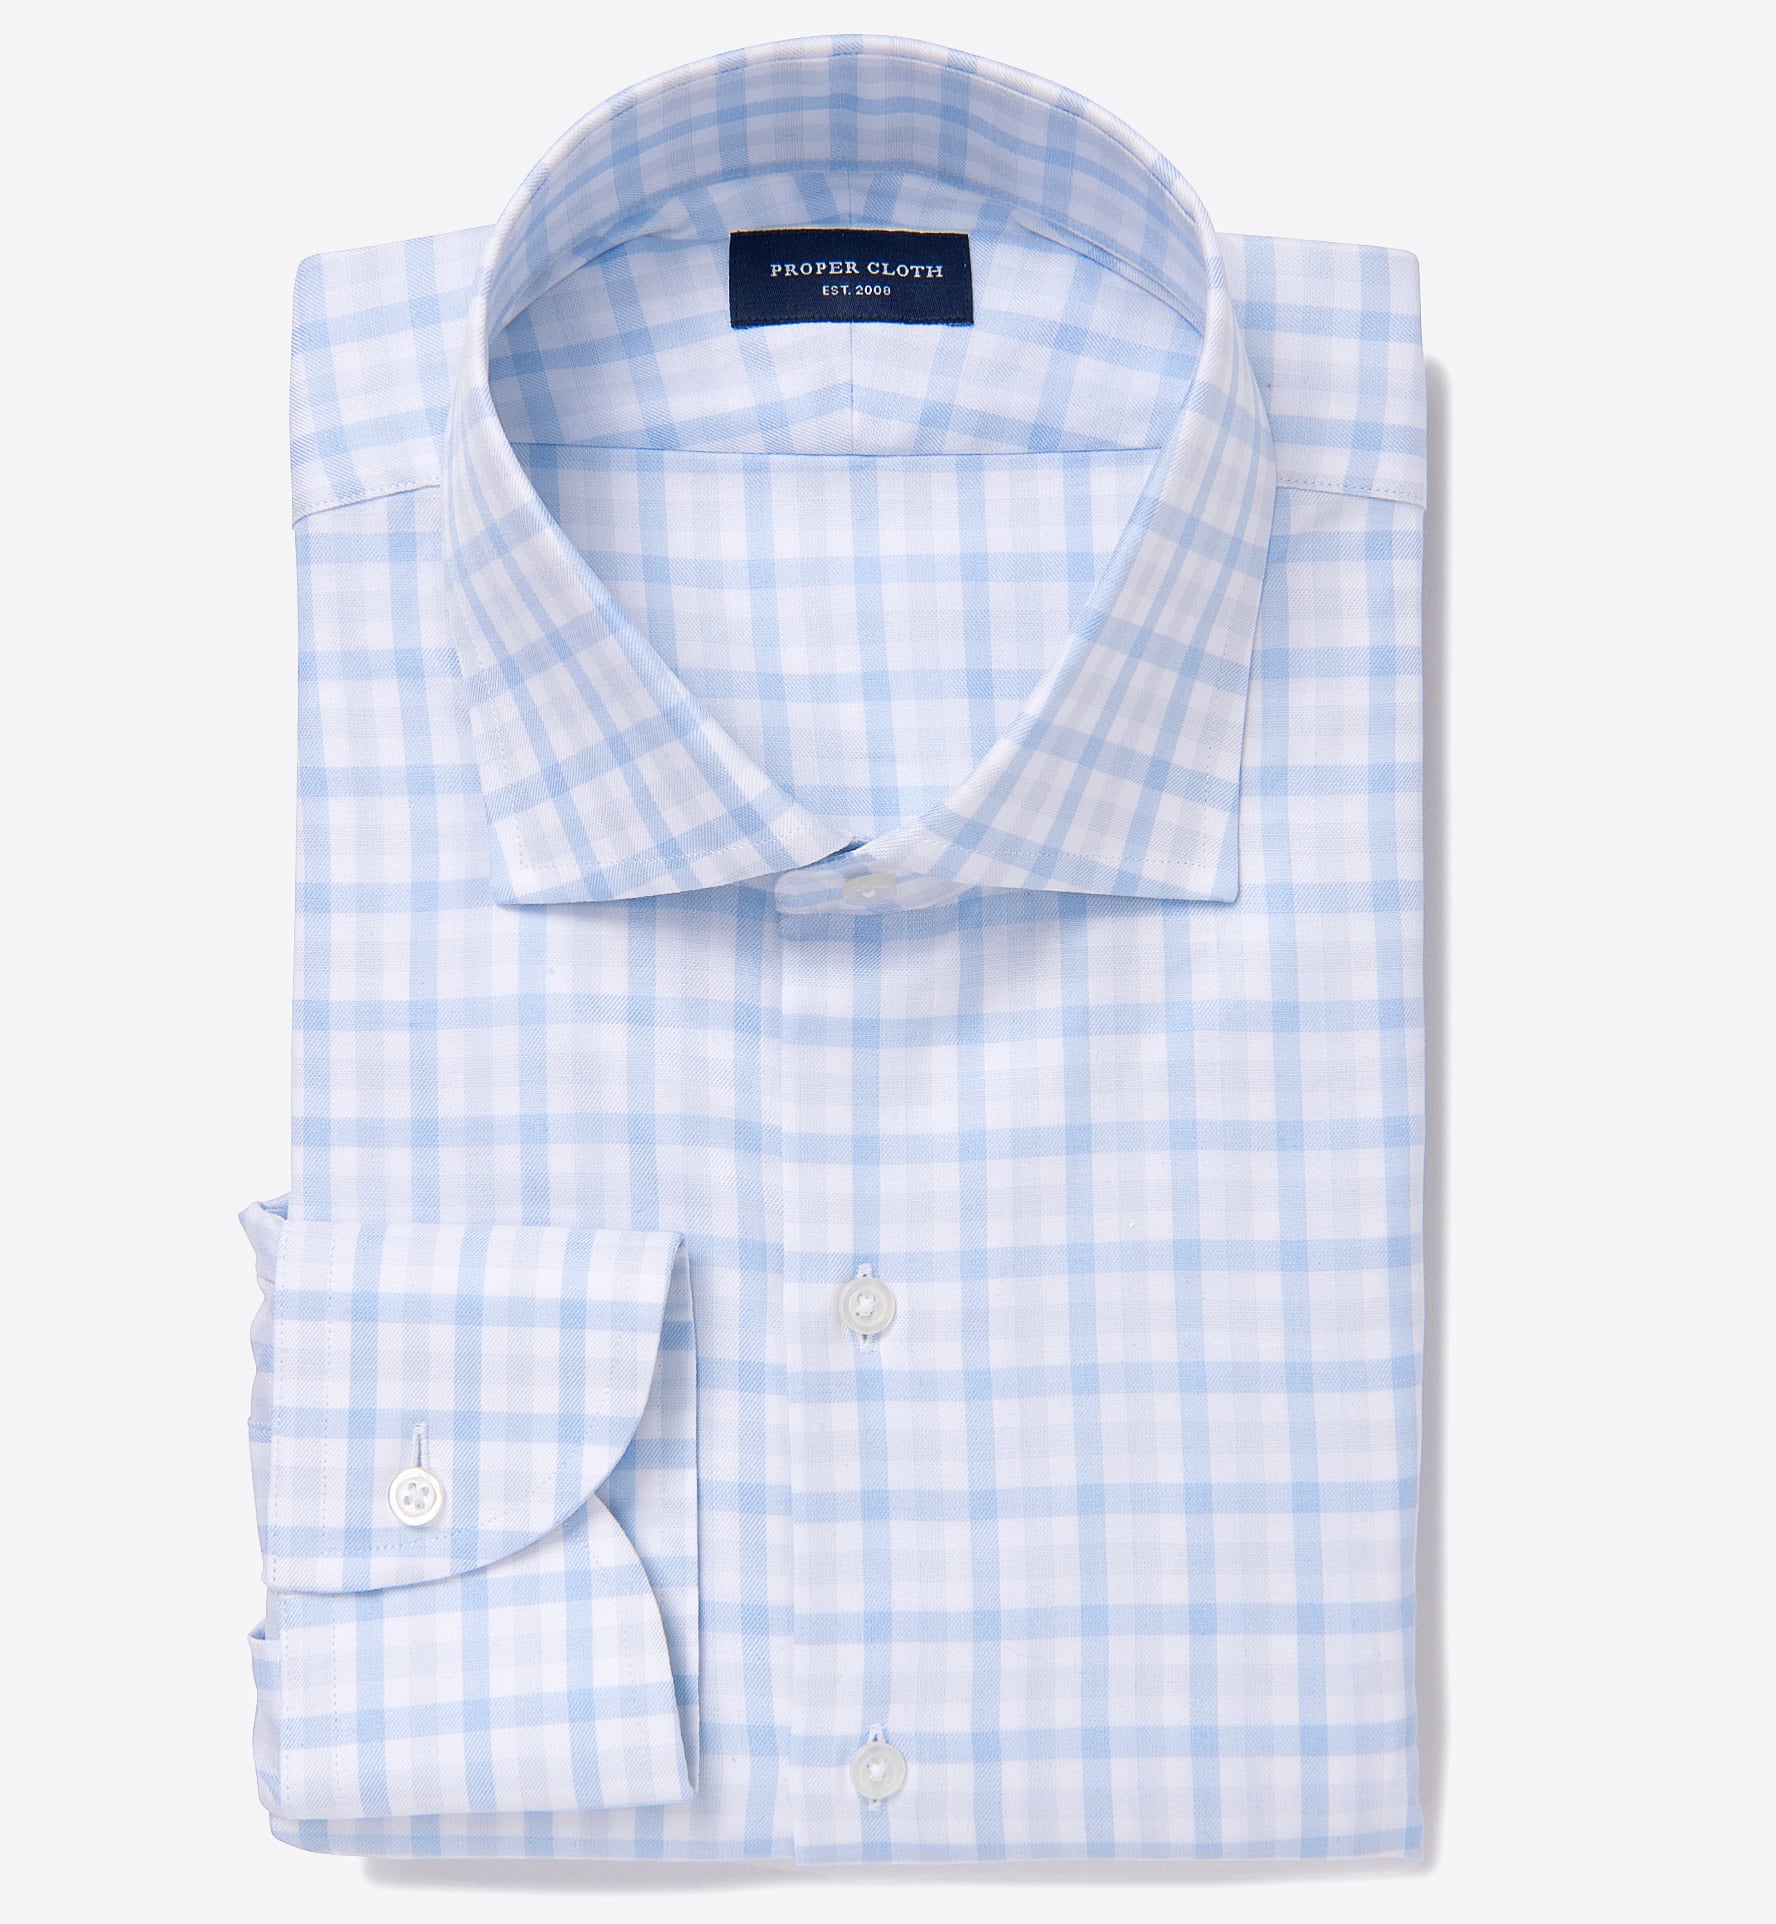 Lucca Grey and Sky Blue Multi Gingham Men's Dress Shirt by Proper Cloth